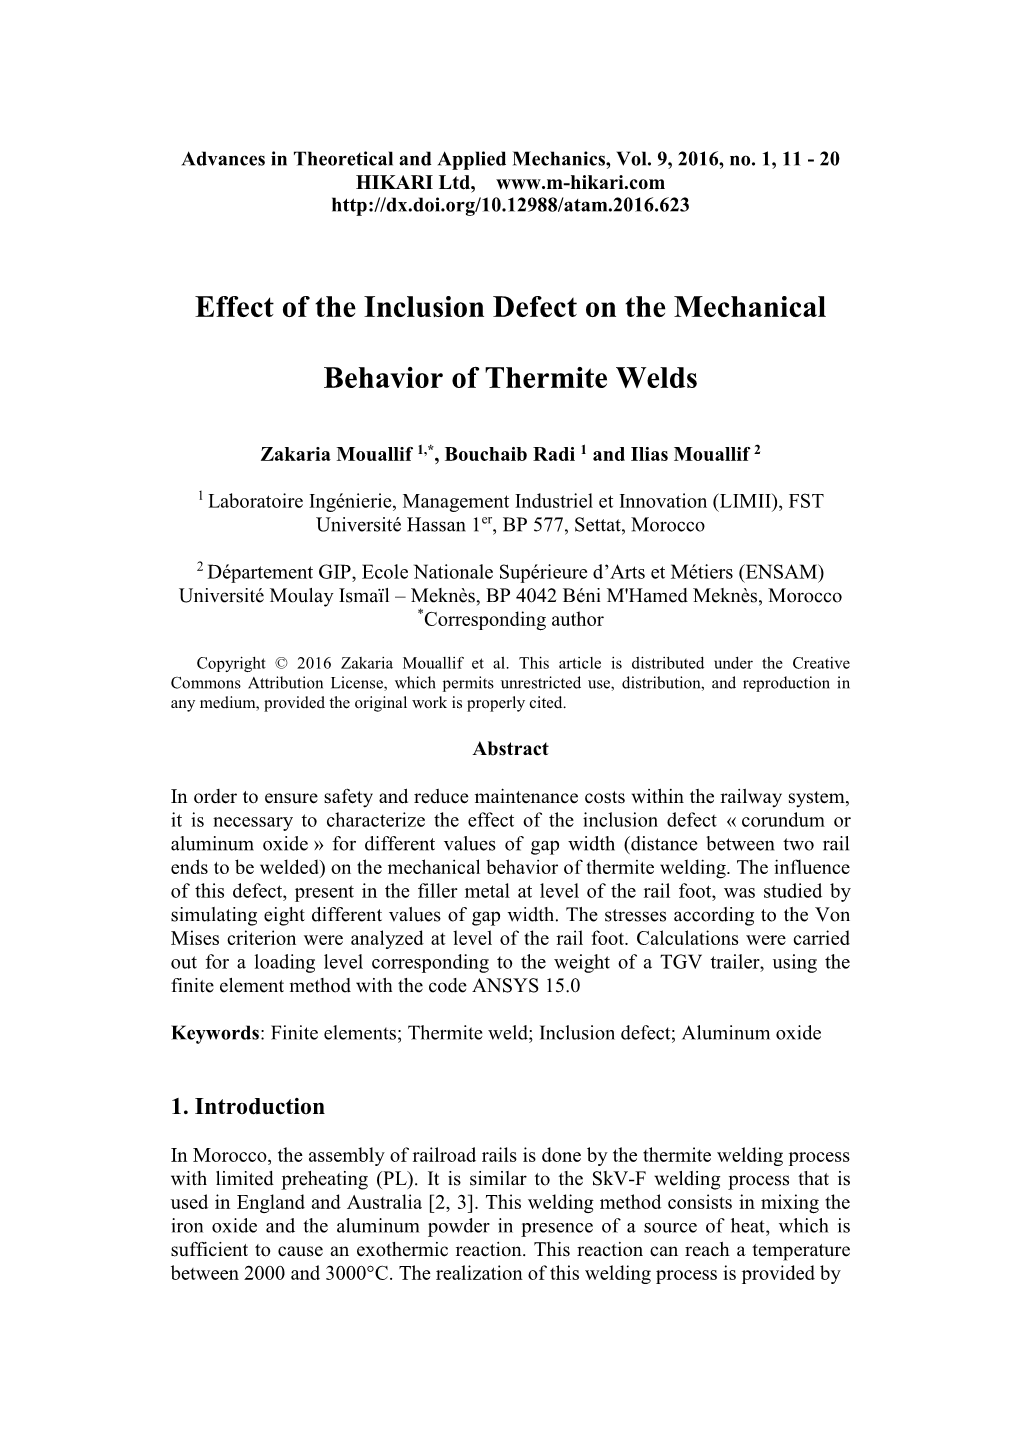 Effect of the Inclusion Defect on the Mechanical Behavior of Thermite